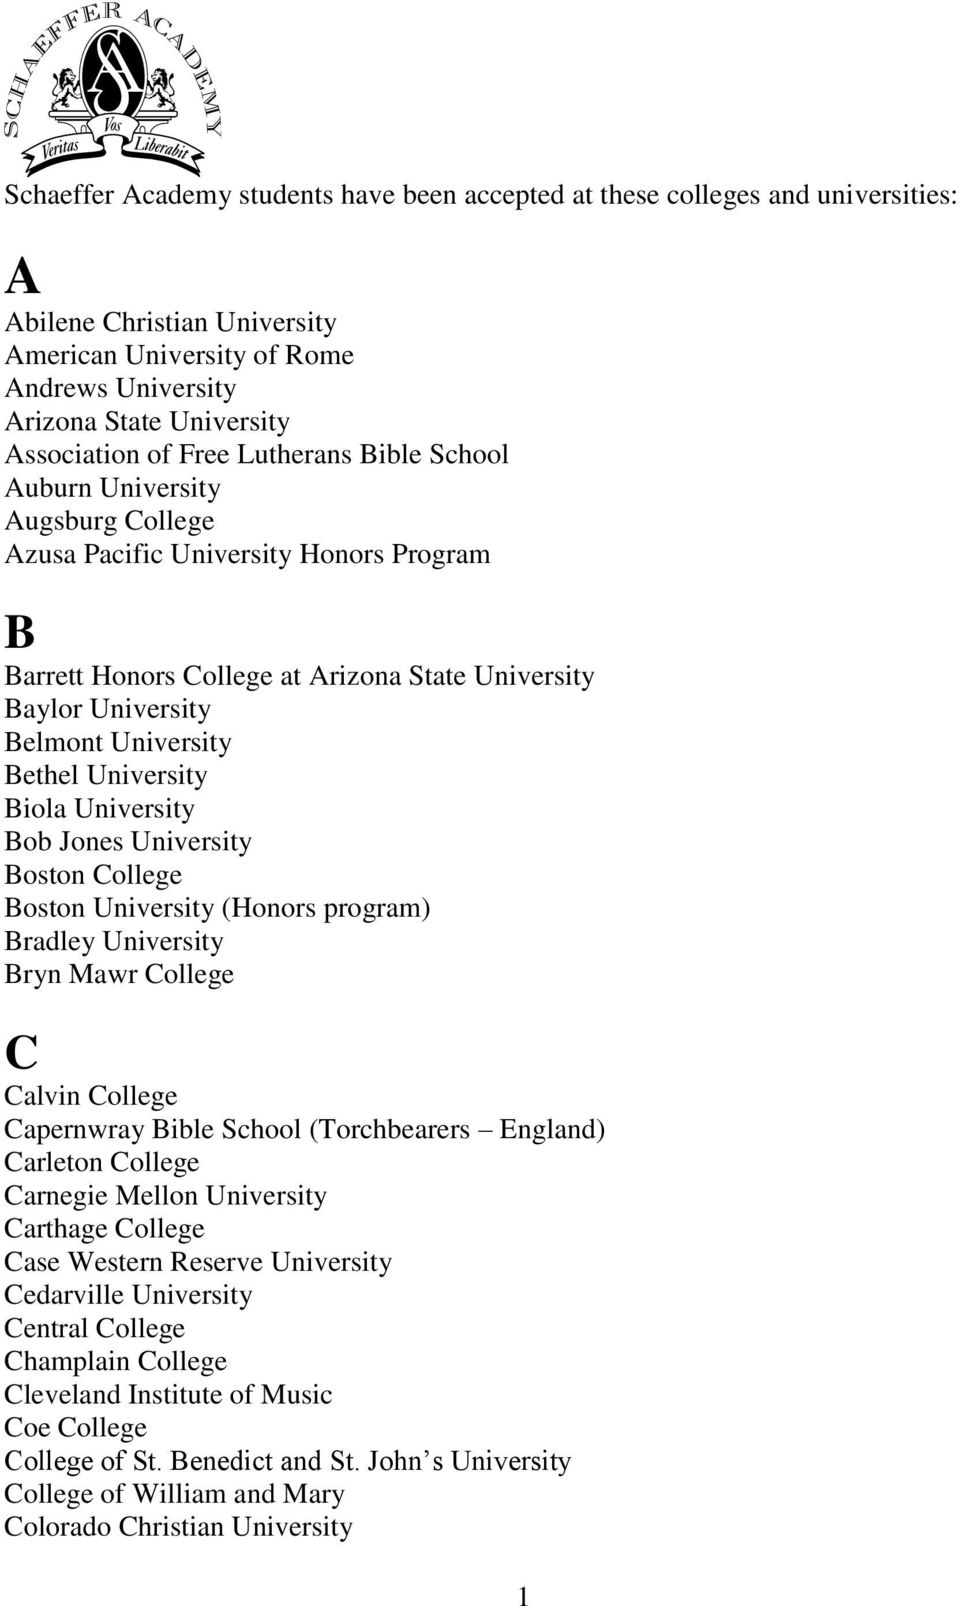 Schaeffer Academy Students Have Been Accepted At These Colleges And Universities Pdf Free Download